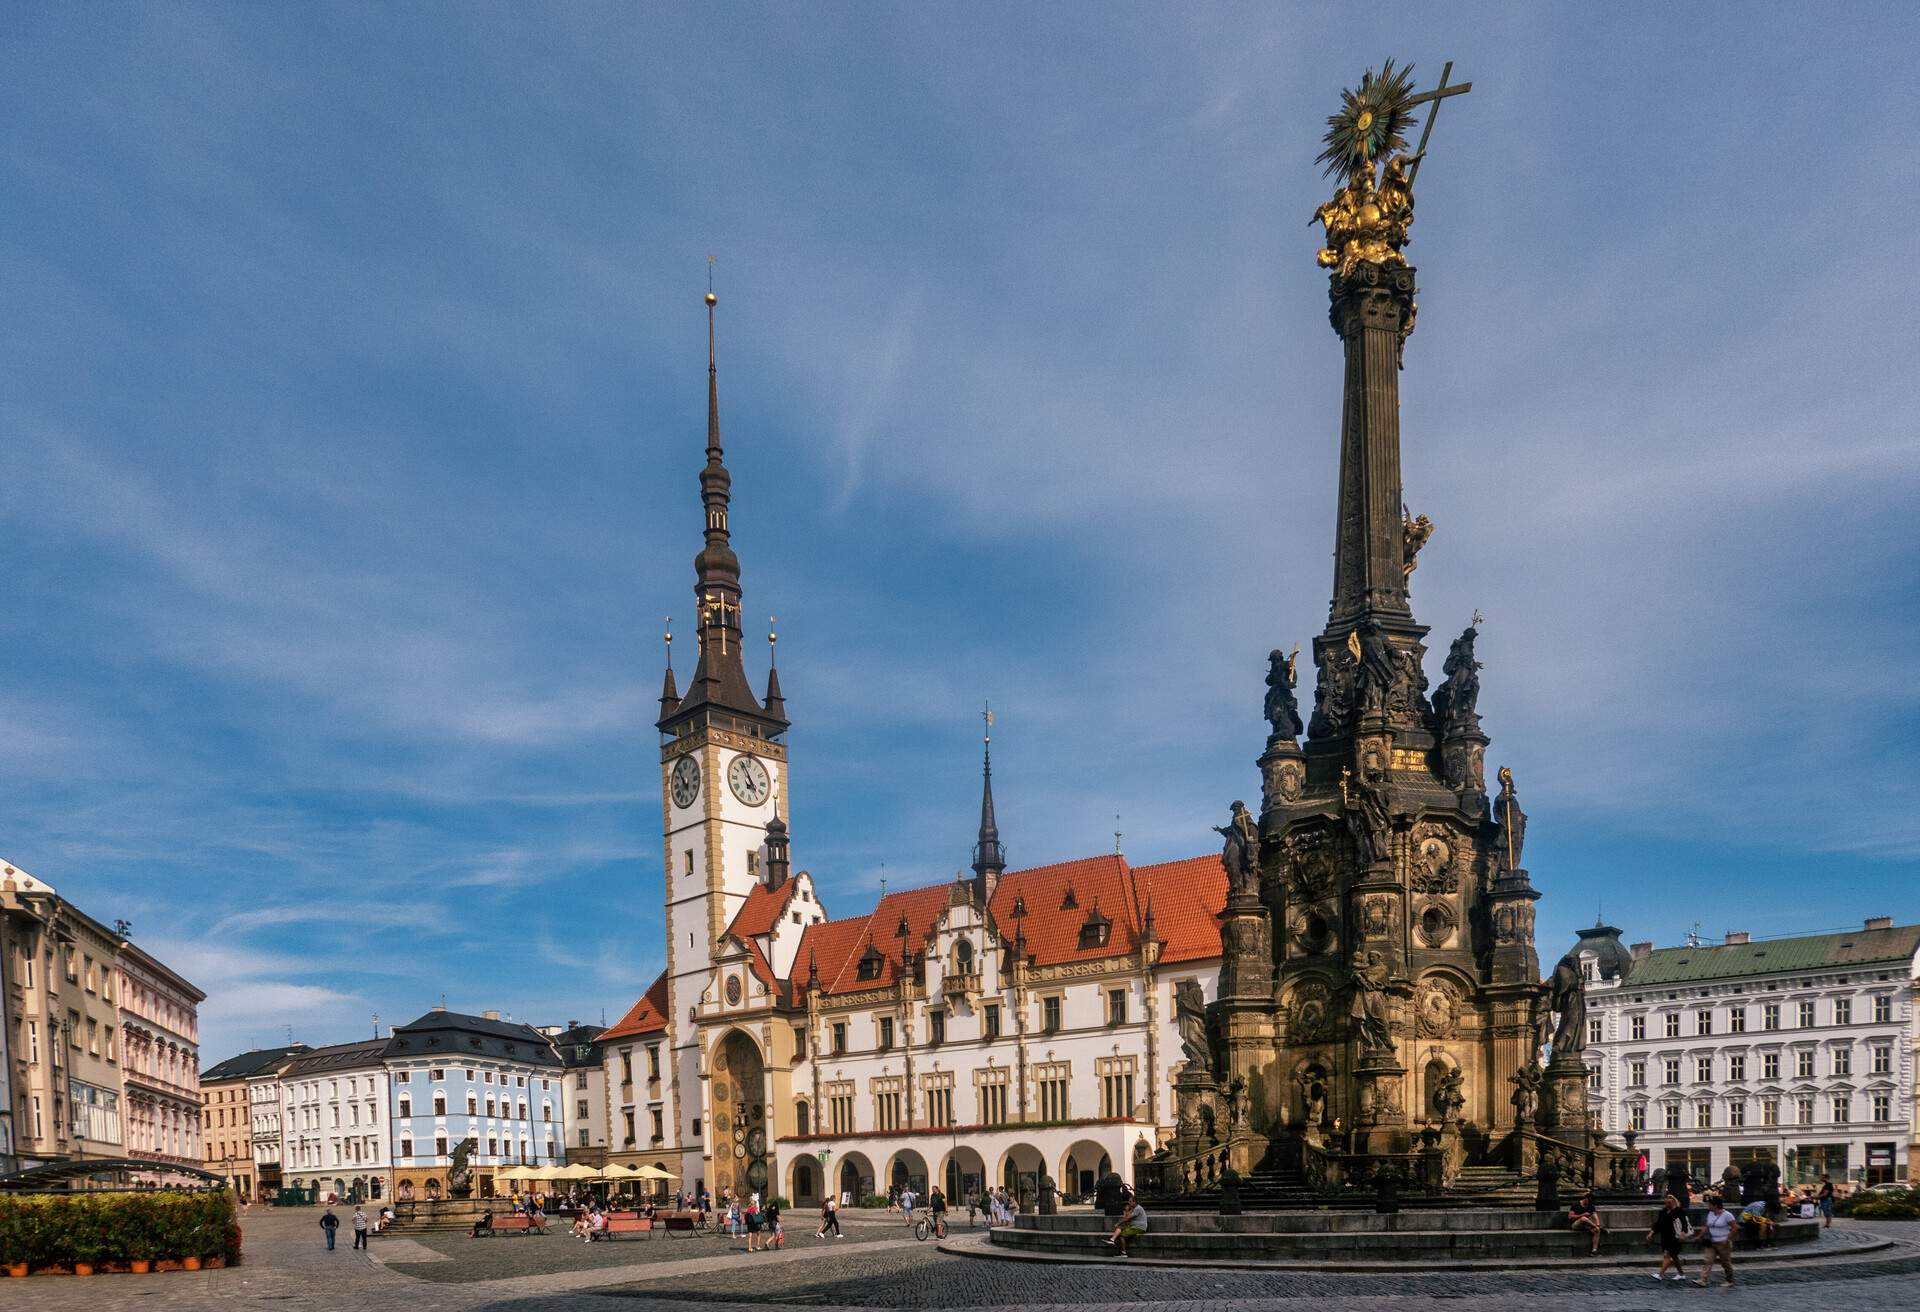 The Holy Trinity Column and town hall at Horni namesti square in Olomouc, Czech Republic.